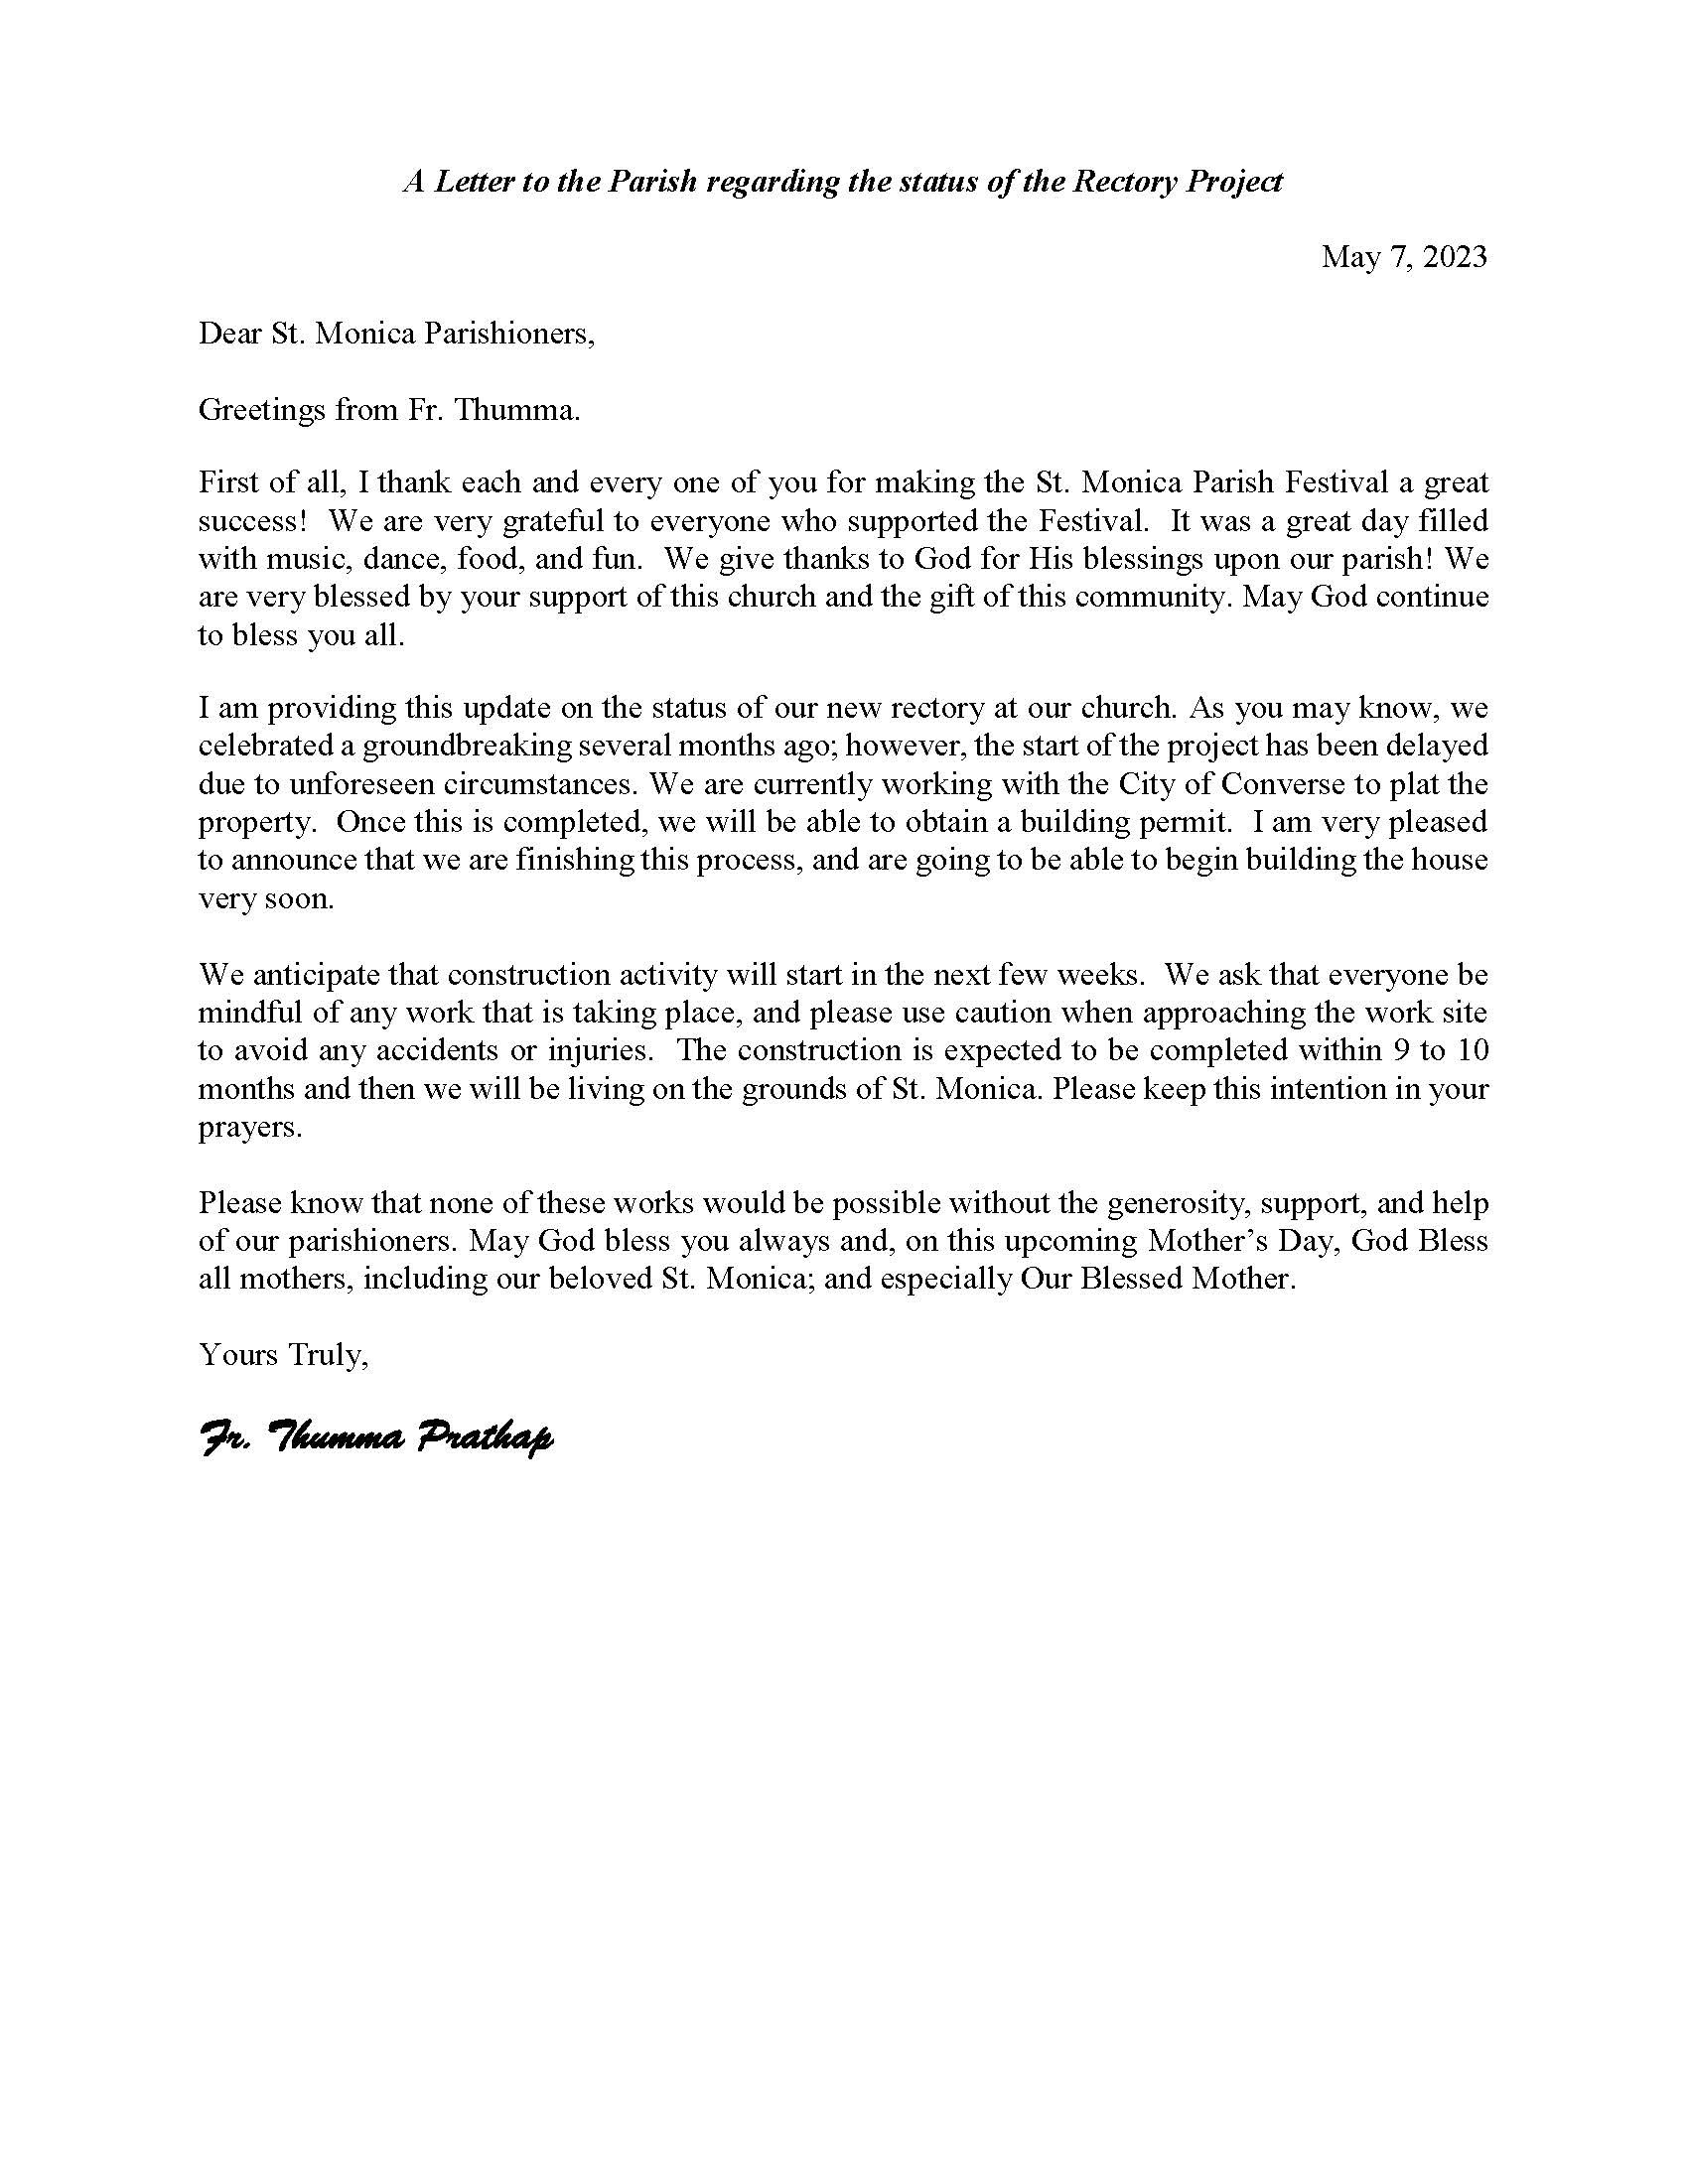 Letter From Fr. Thumma Rectory Update